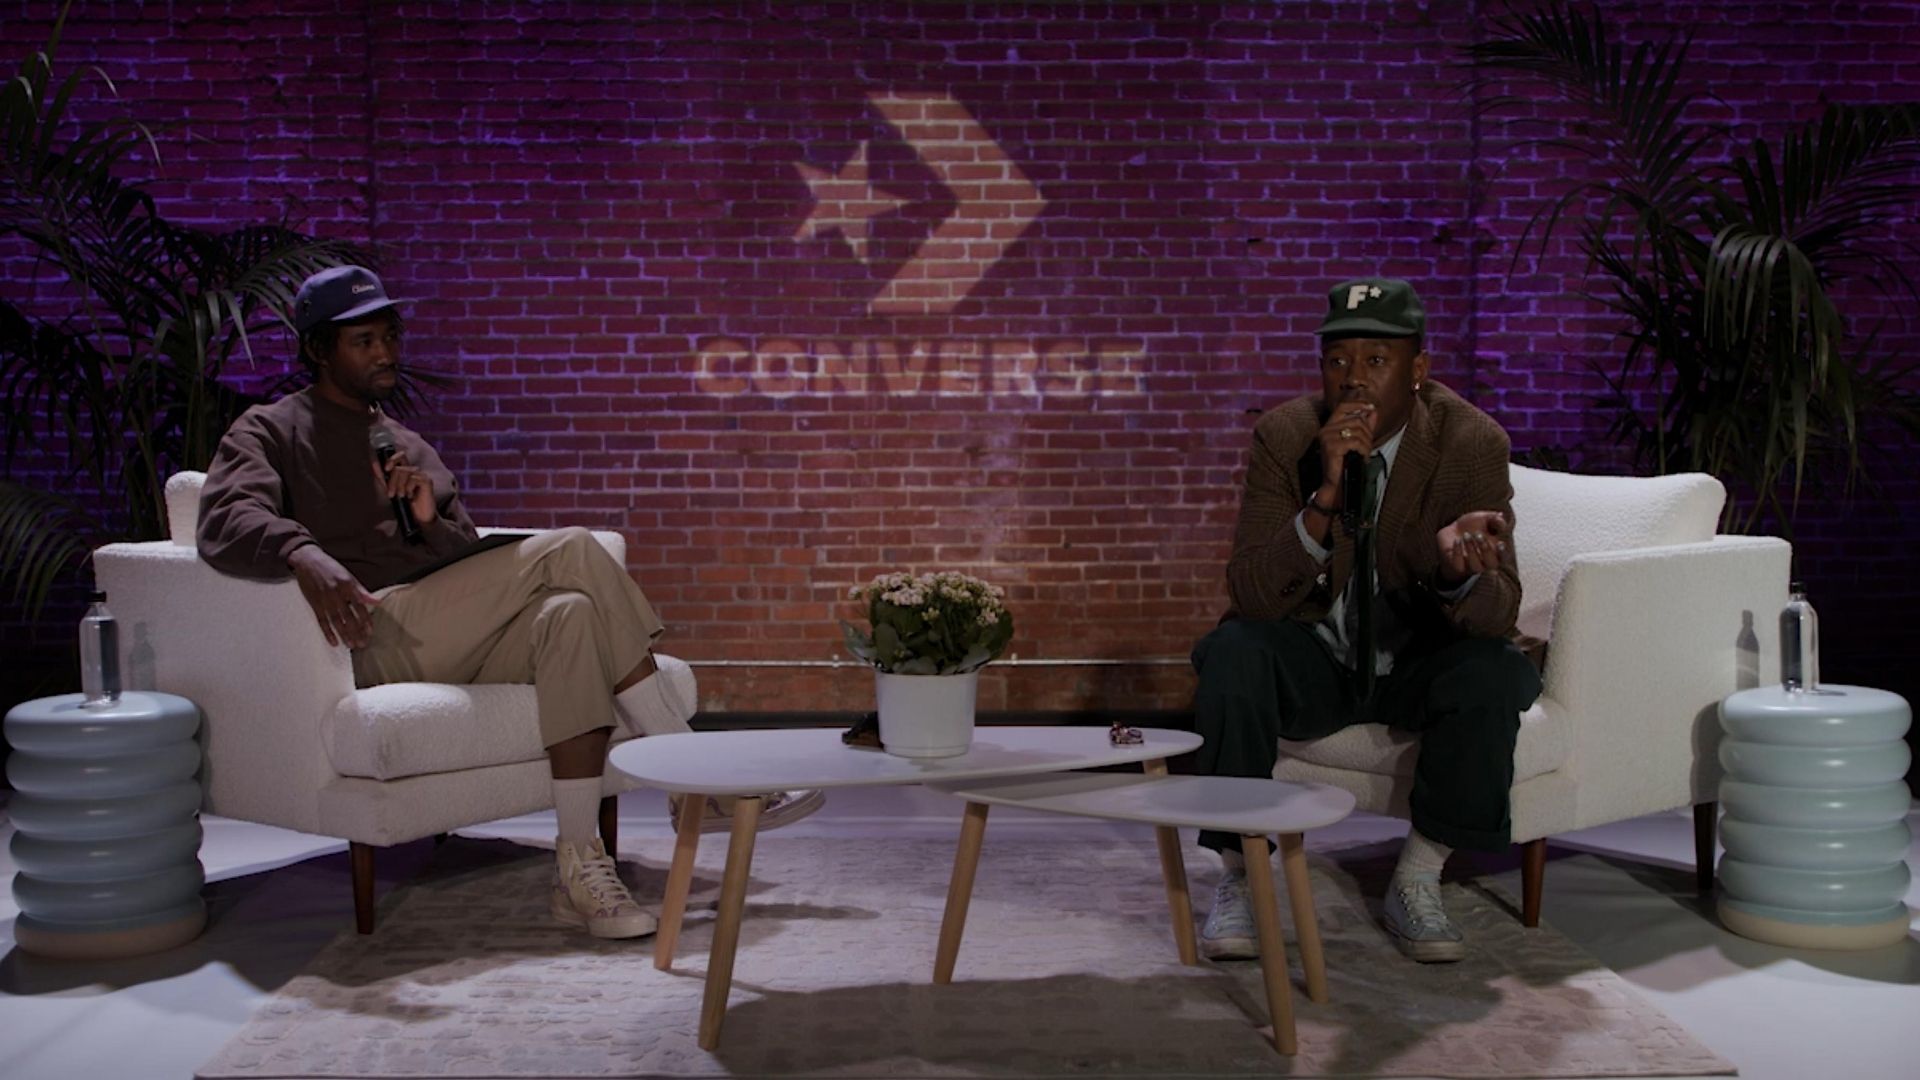 Tyler the Creator and John Boyega sitting having talk with microphone and converse logo on brick wall behind them